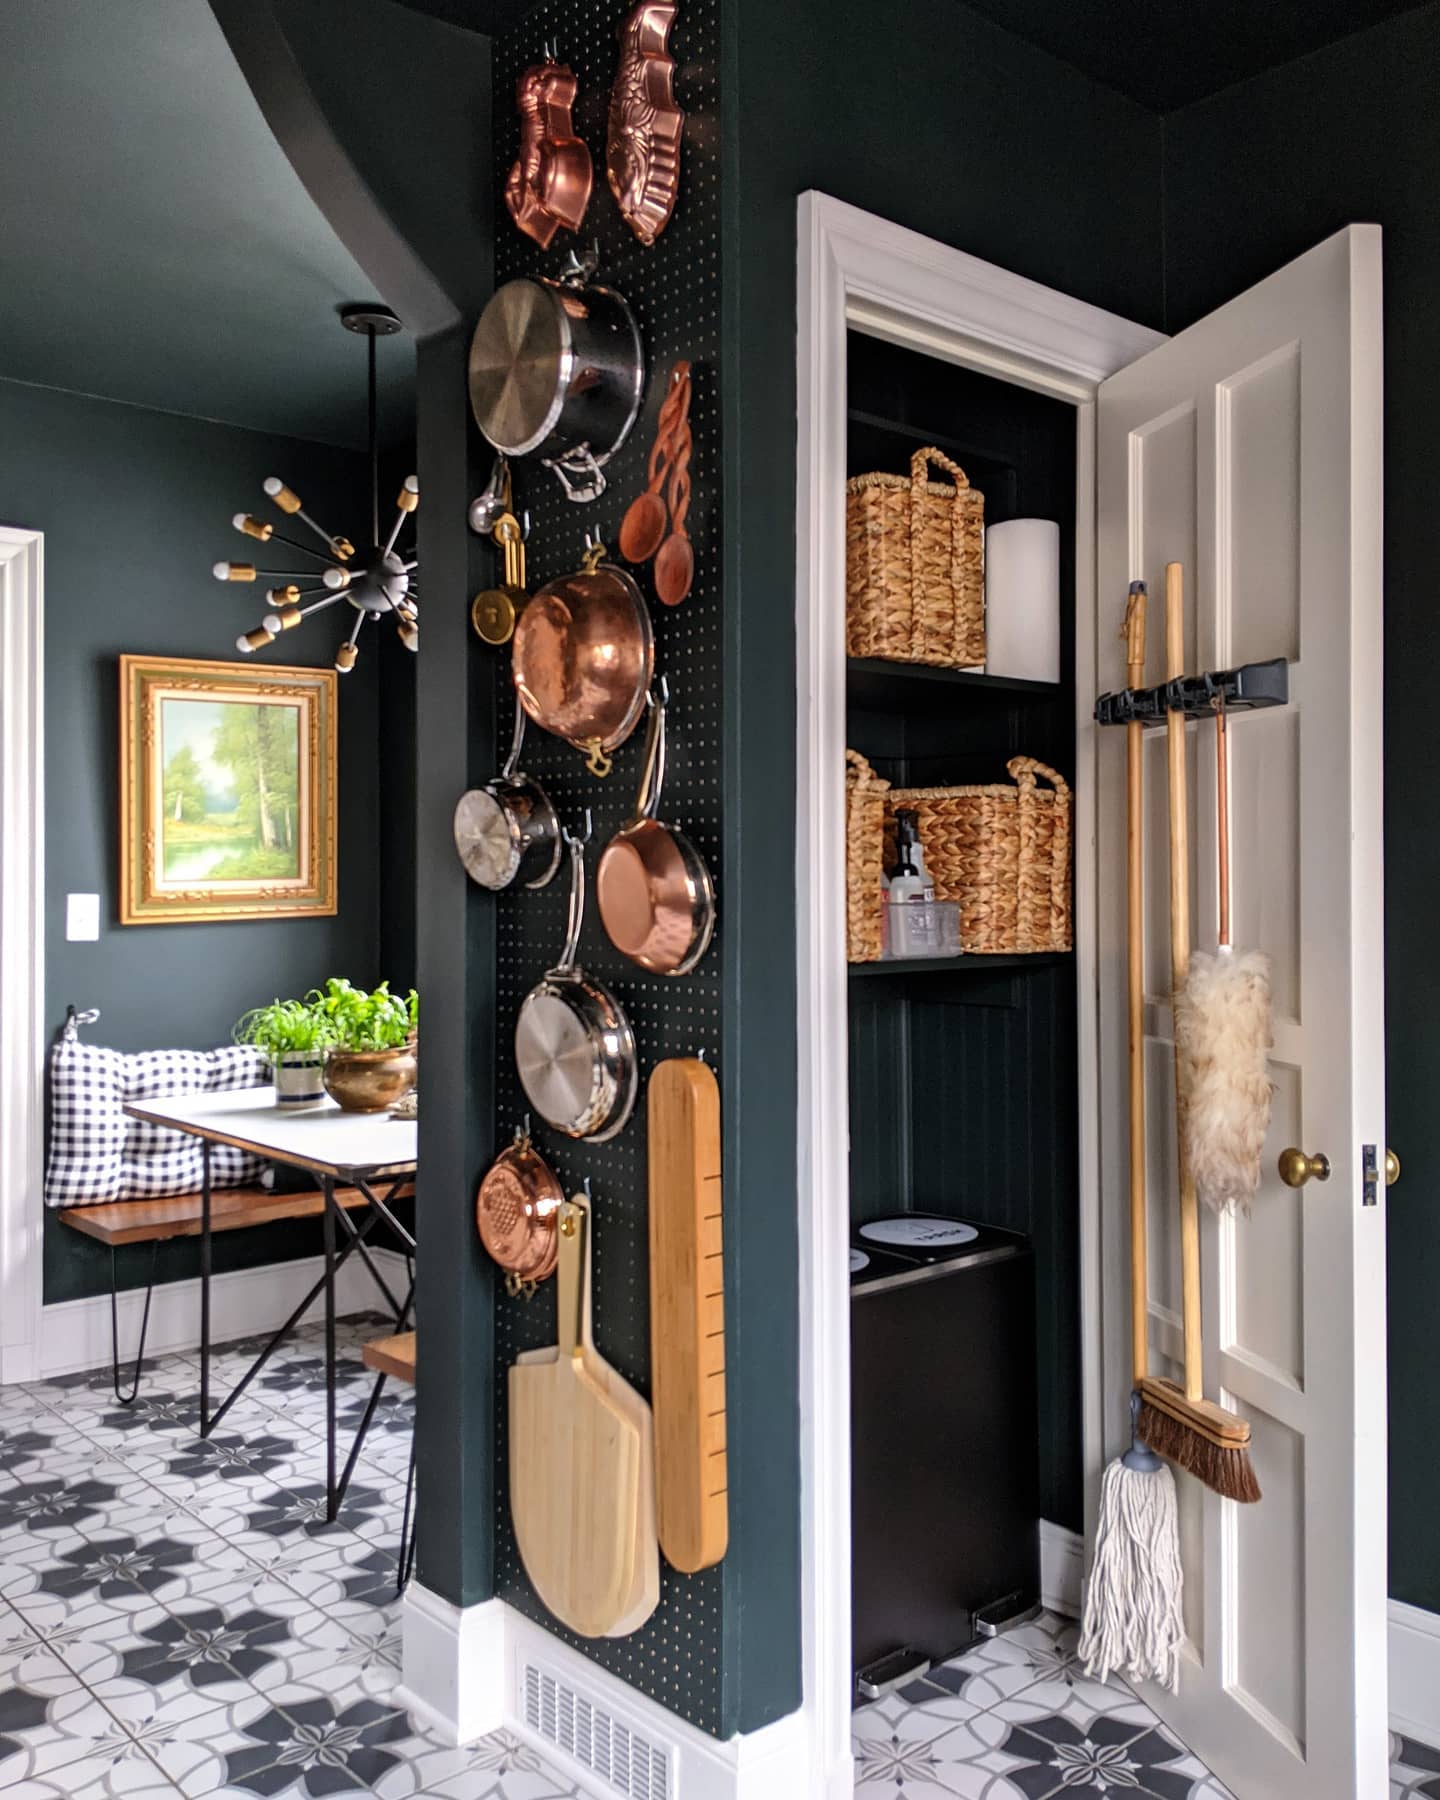 an unused wall installed with a pegboard to hold pans and pots can be a great way to store such items while creating a unique wall gallery.